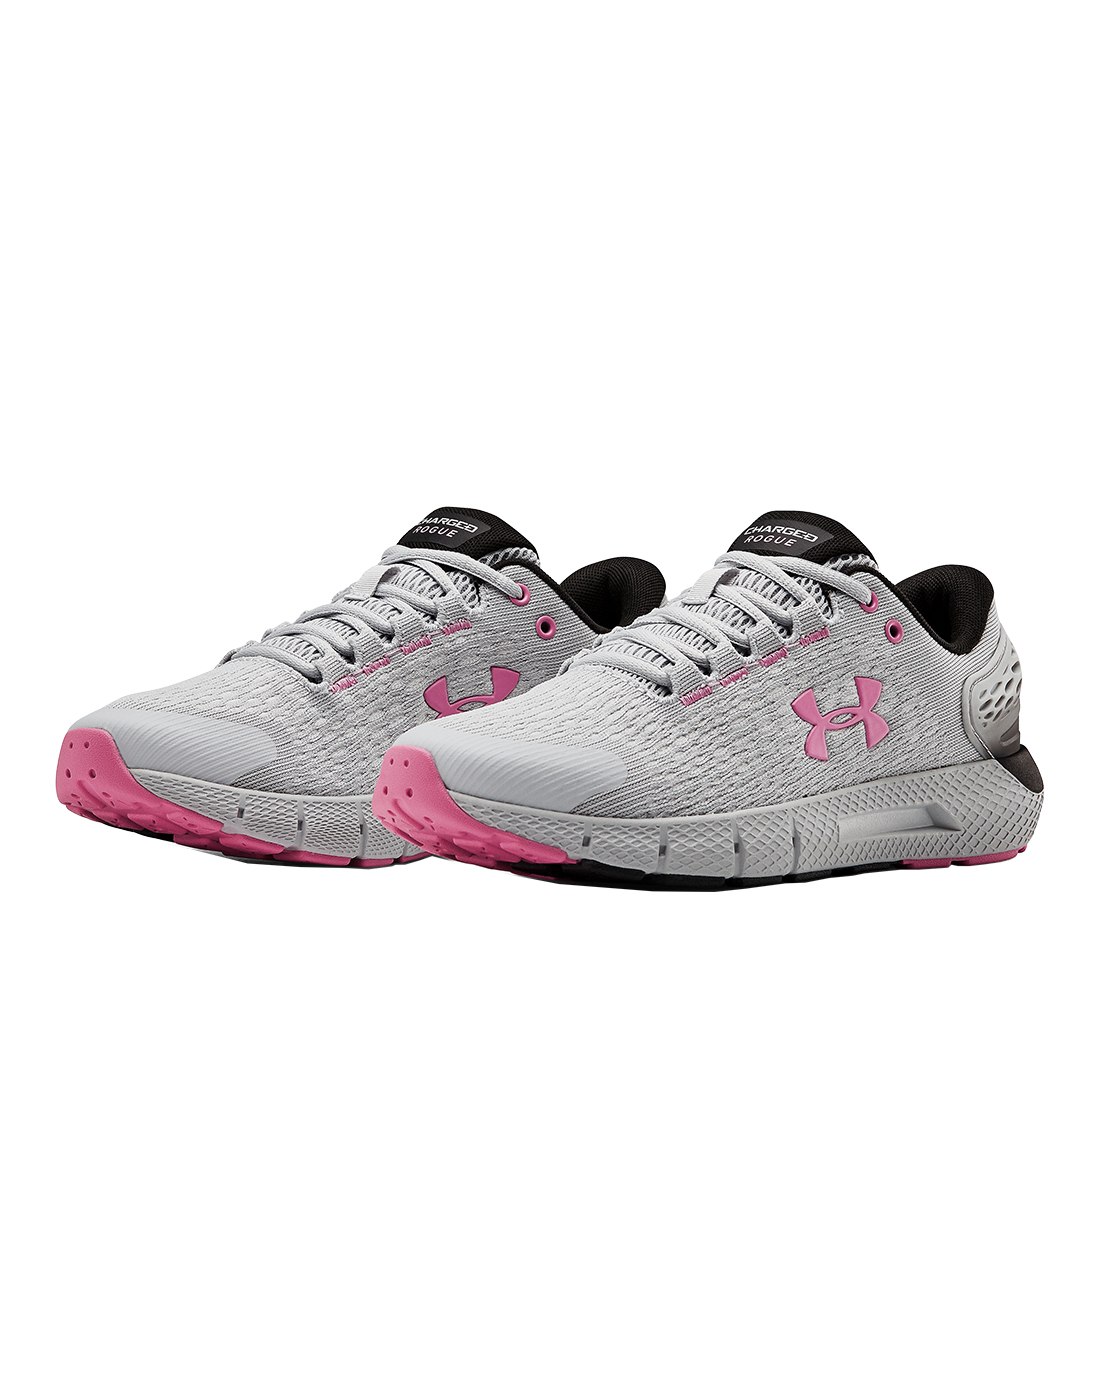 Under Armour Womens Charged Rogue 2 - Grey | Life Style Sports IE